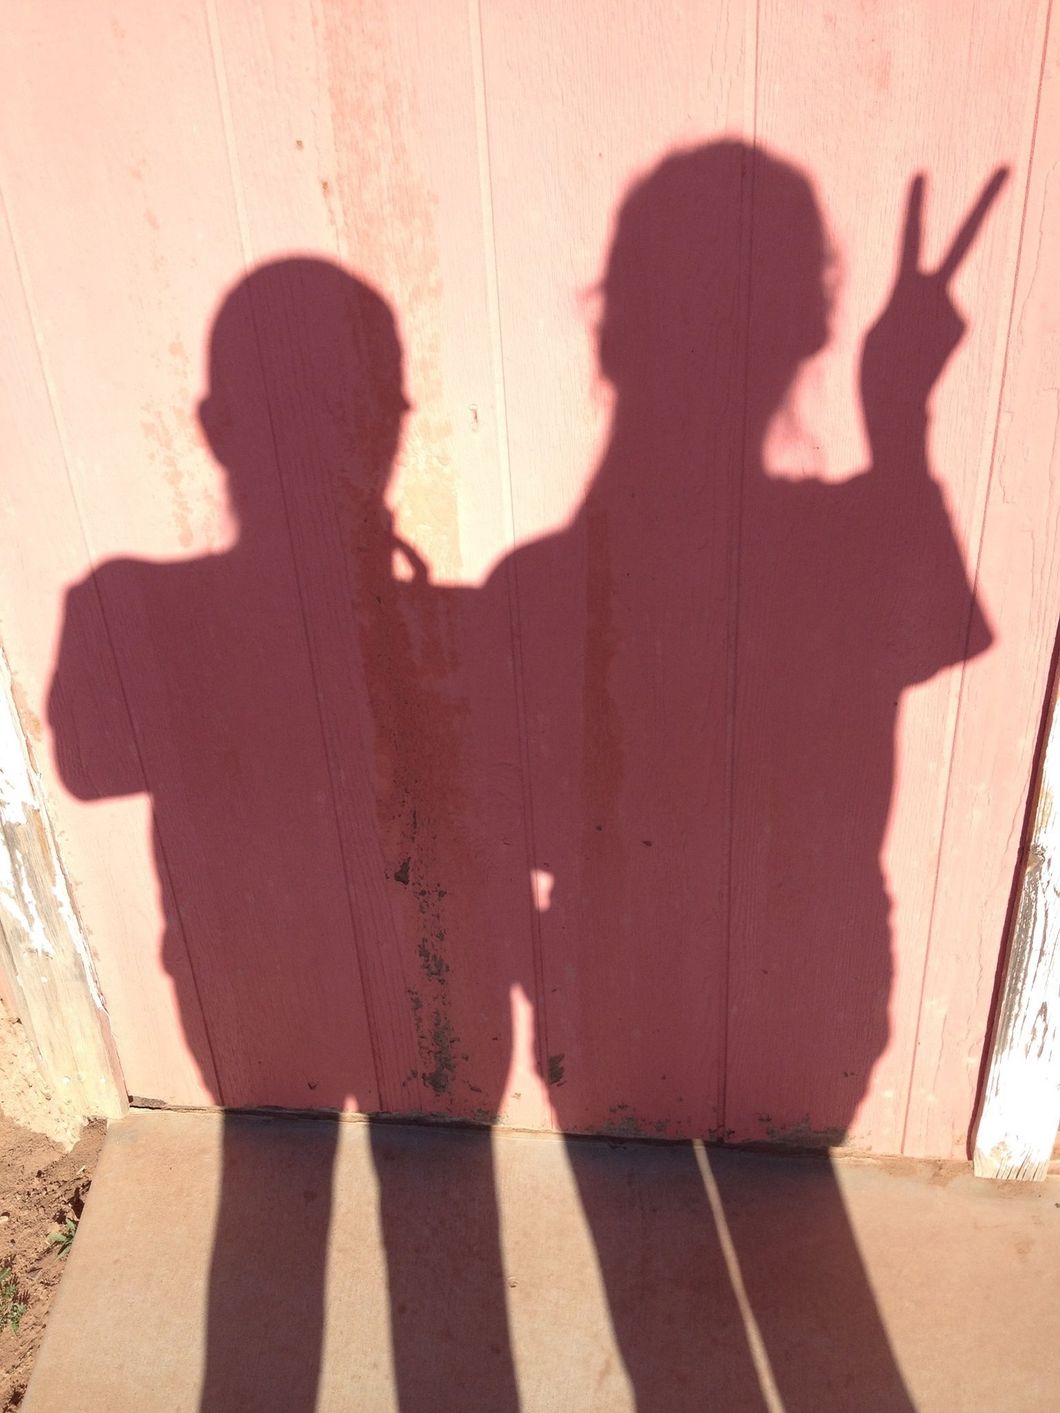 shadow of two people